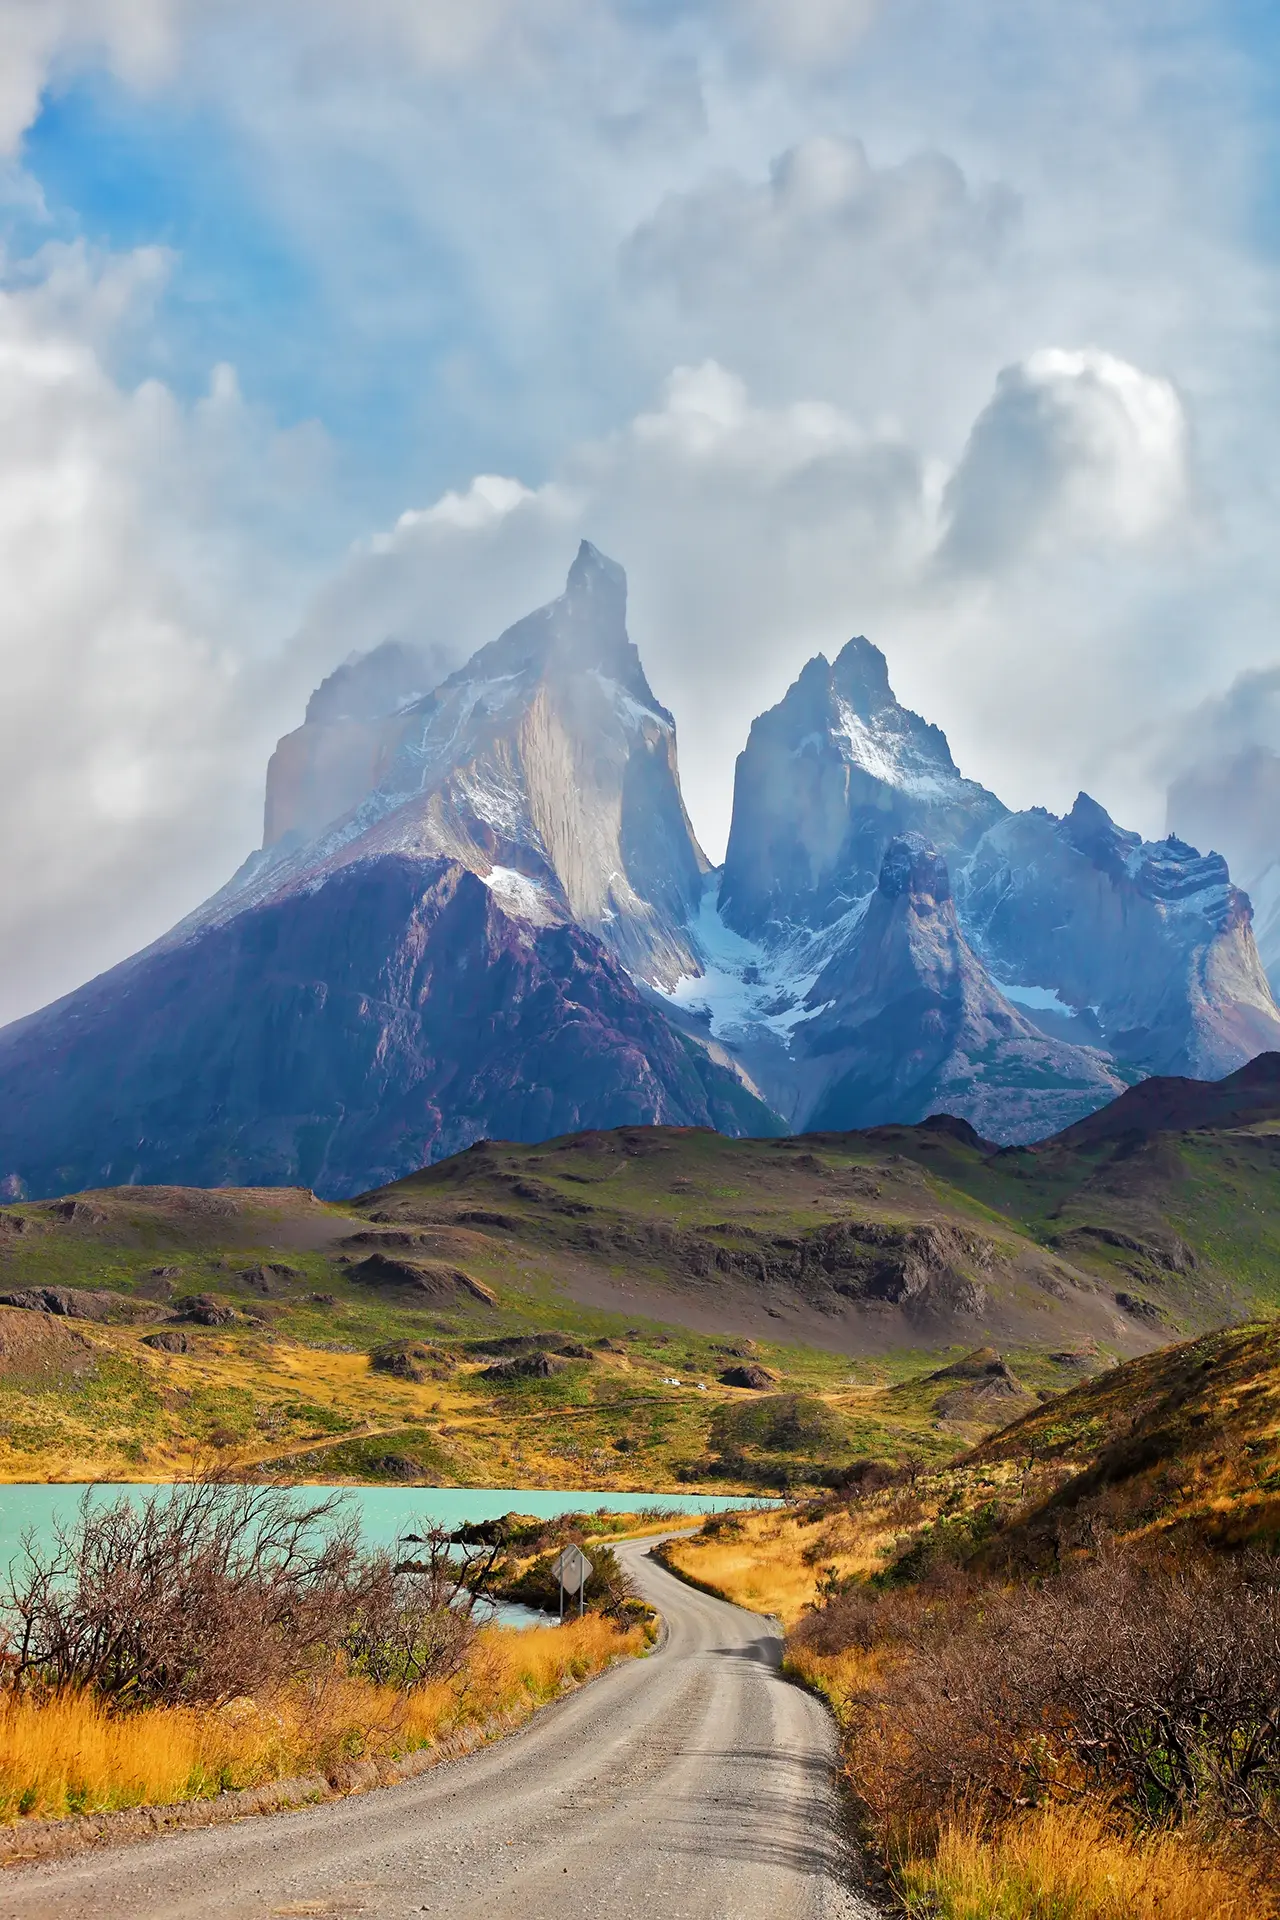 View of Los Cuernos at Torres del Paine National Park, Chile.